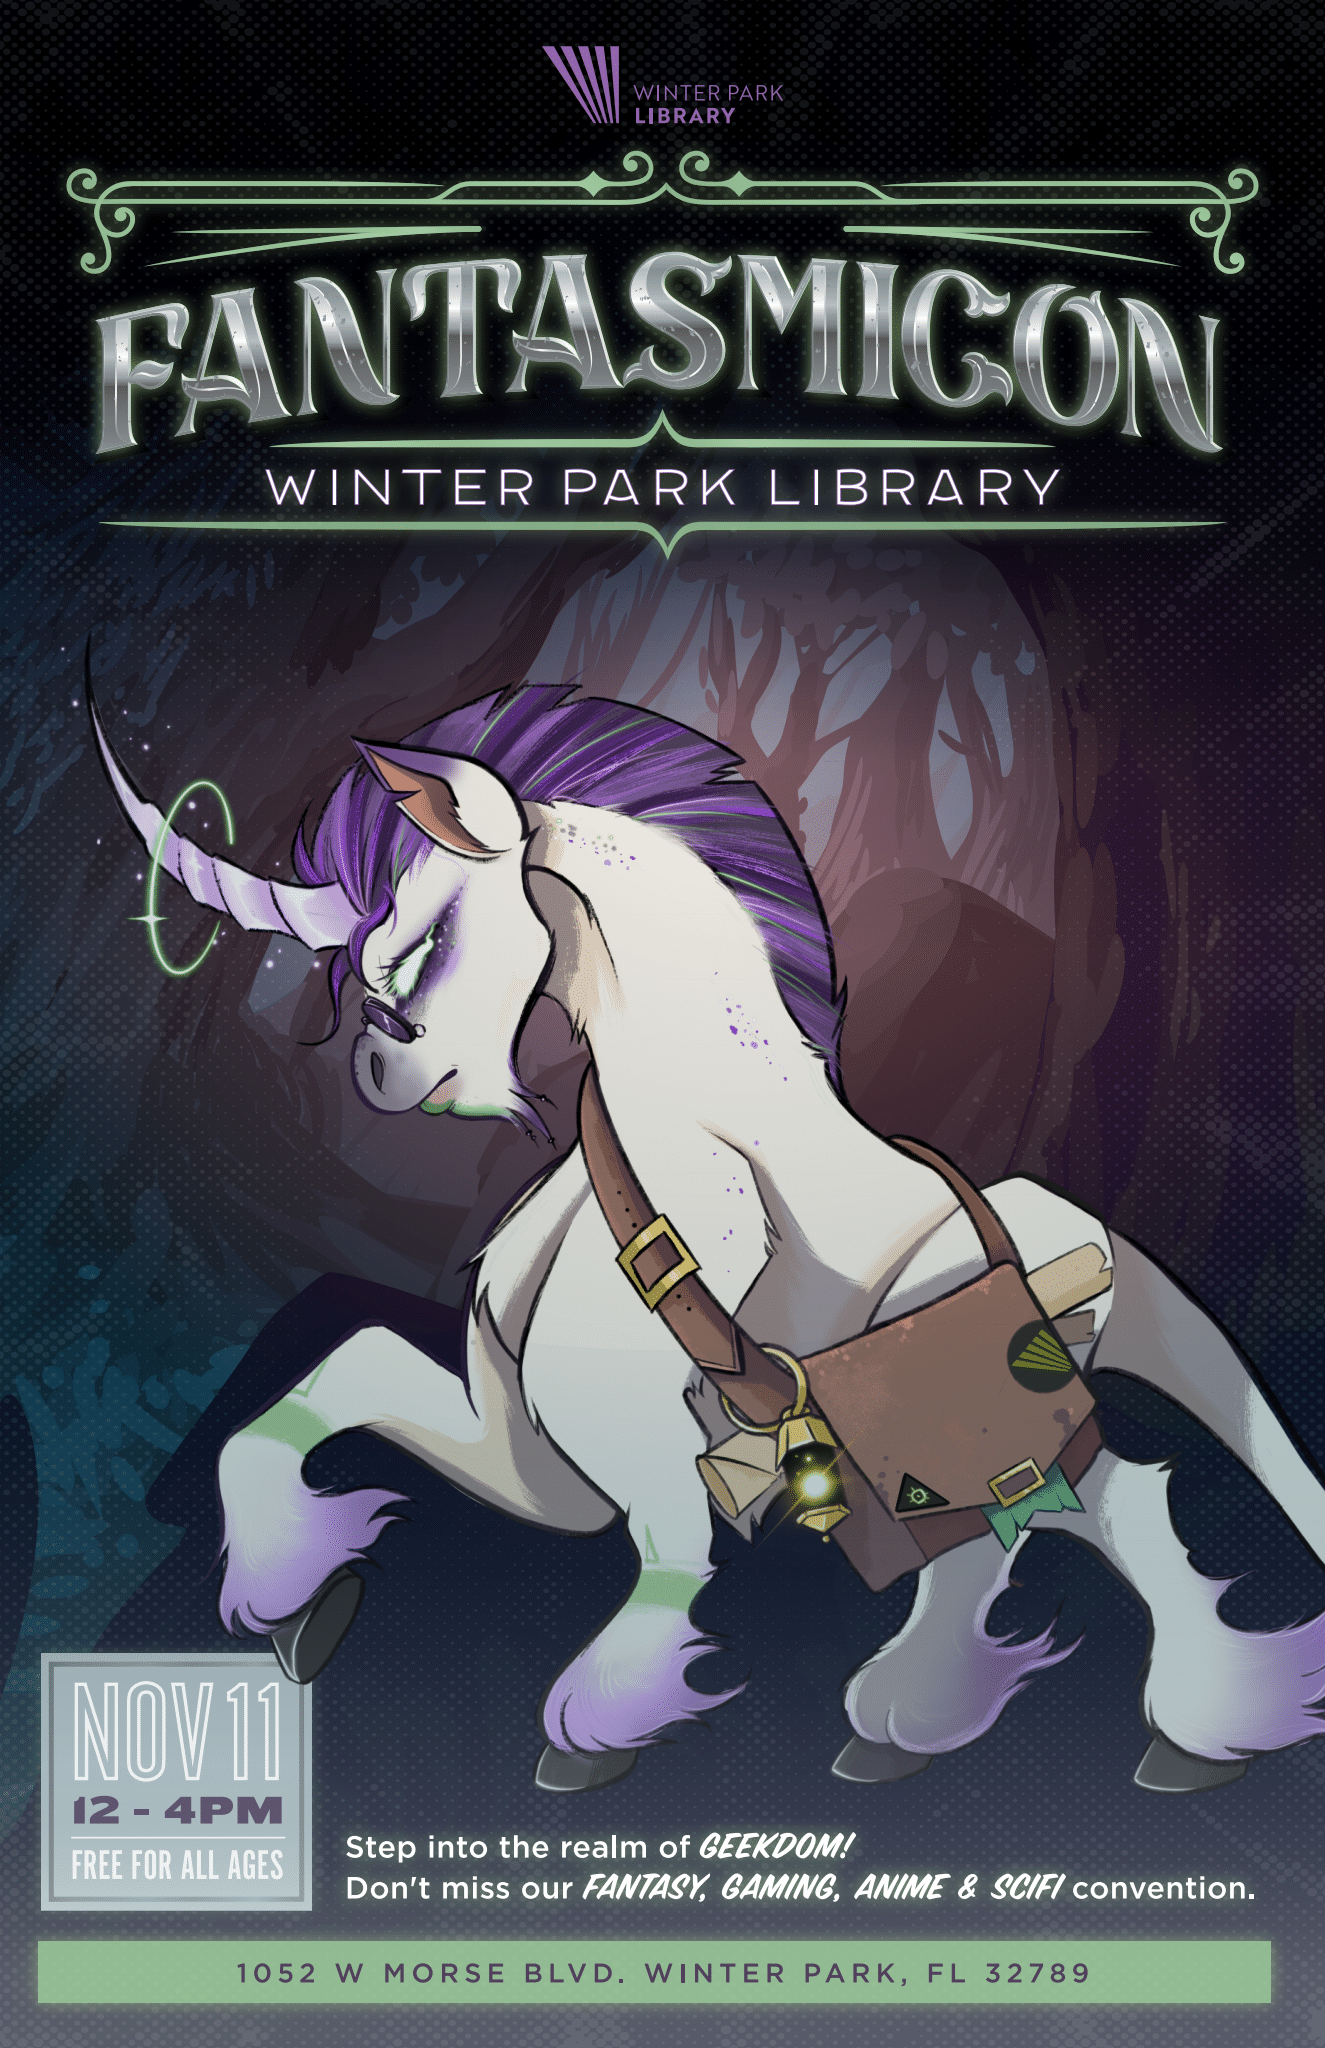 Fantasmicon at Winter Park Library November 11, 12-4pm, Free for all ages